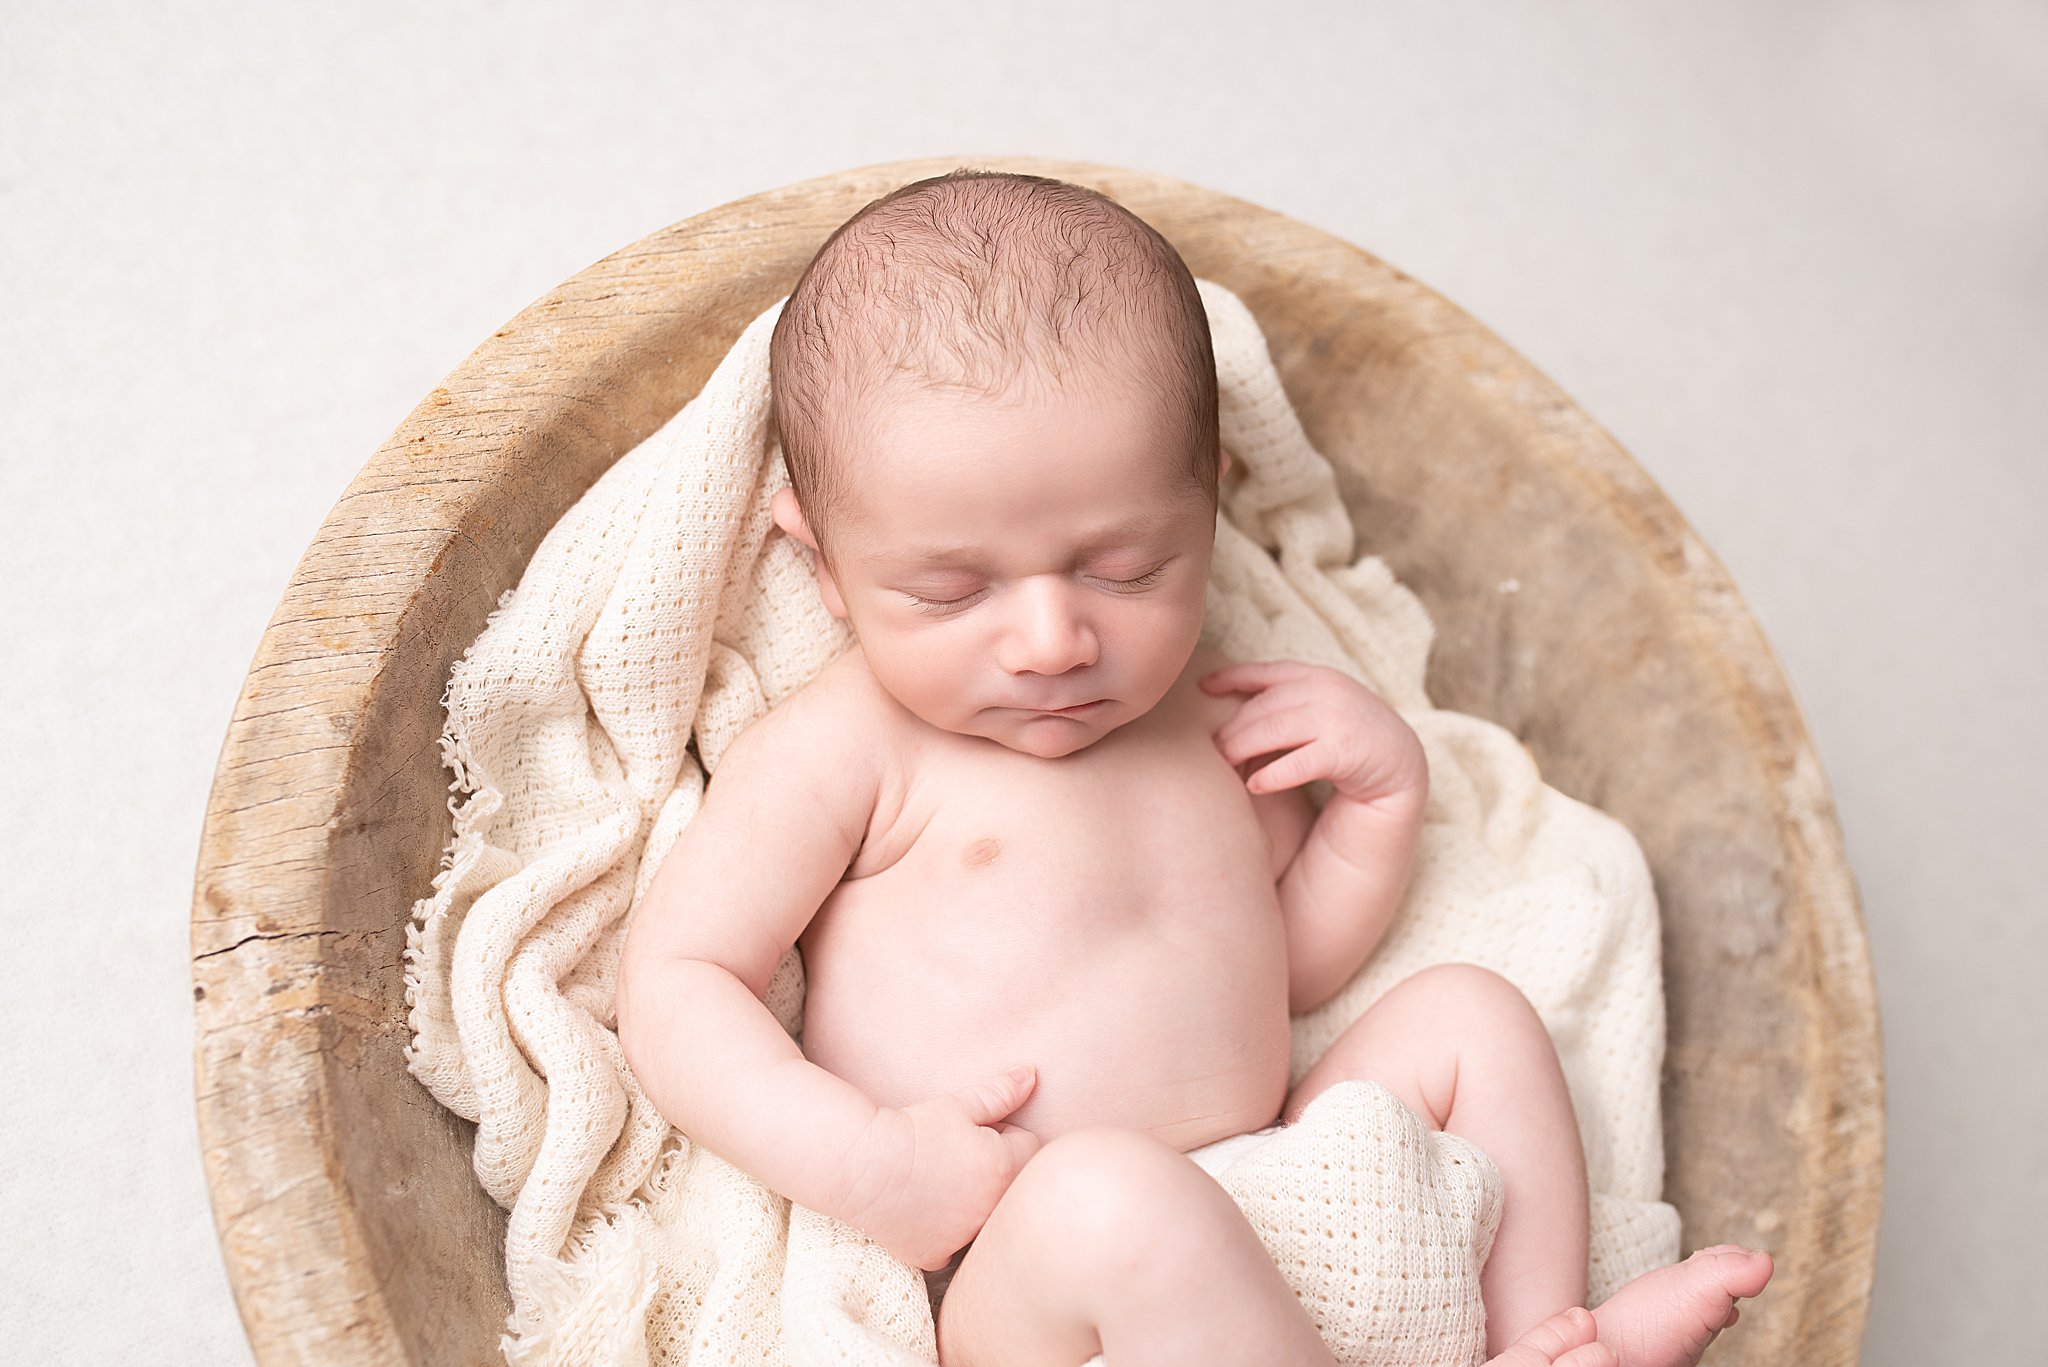 A newborn baby sleeps in a wooden bowl and blanket in a studio after san diego parenting classes